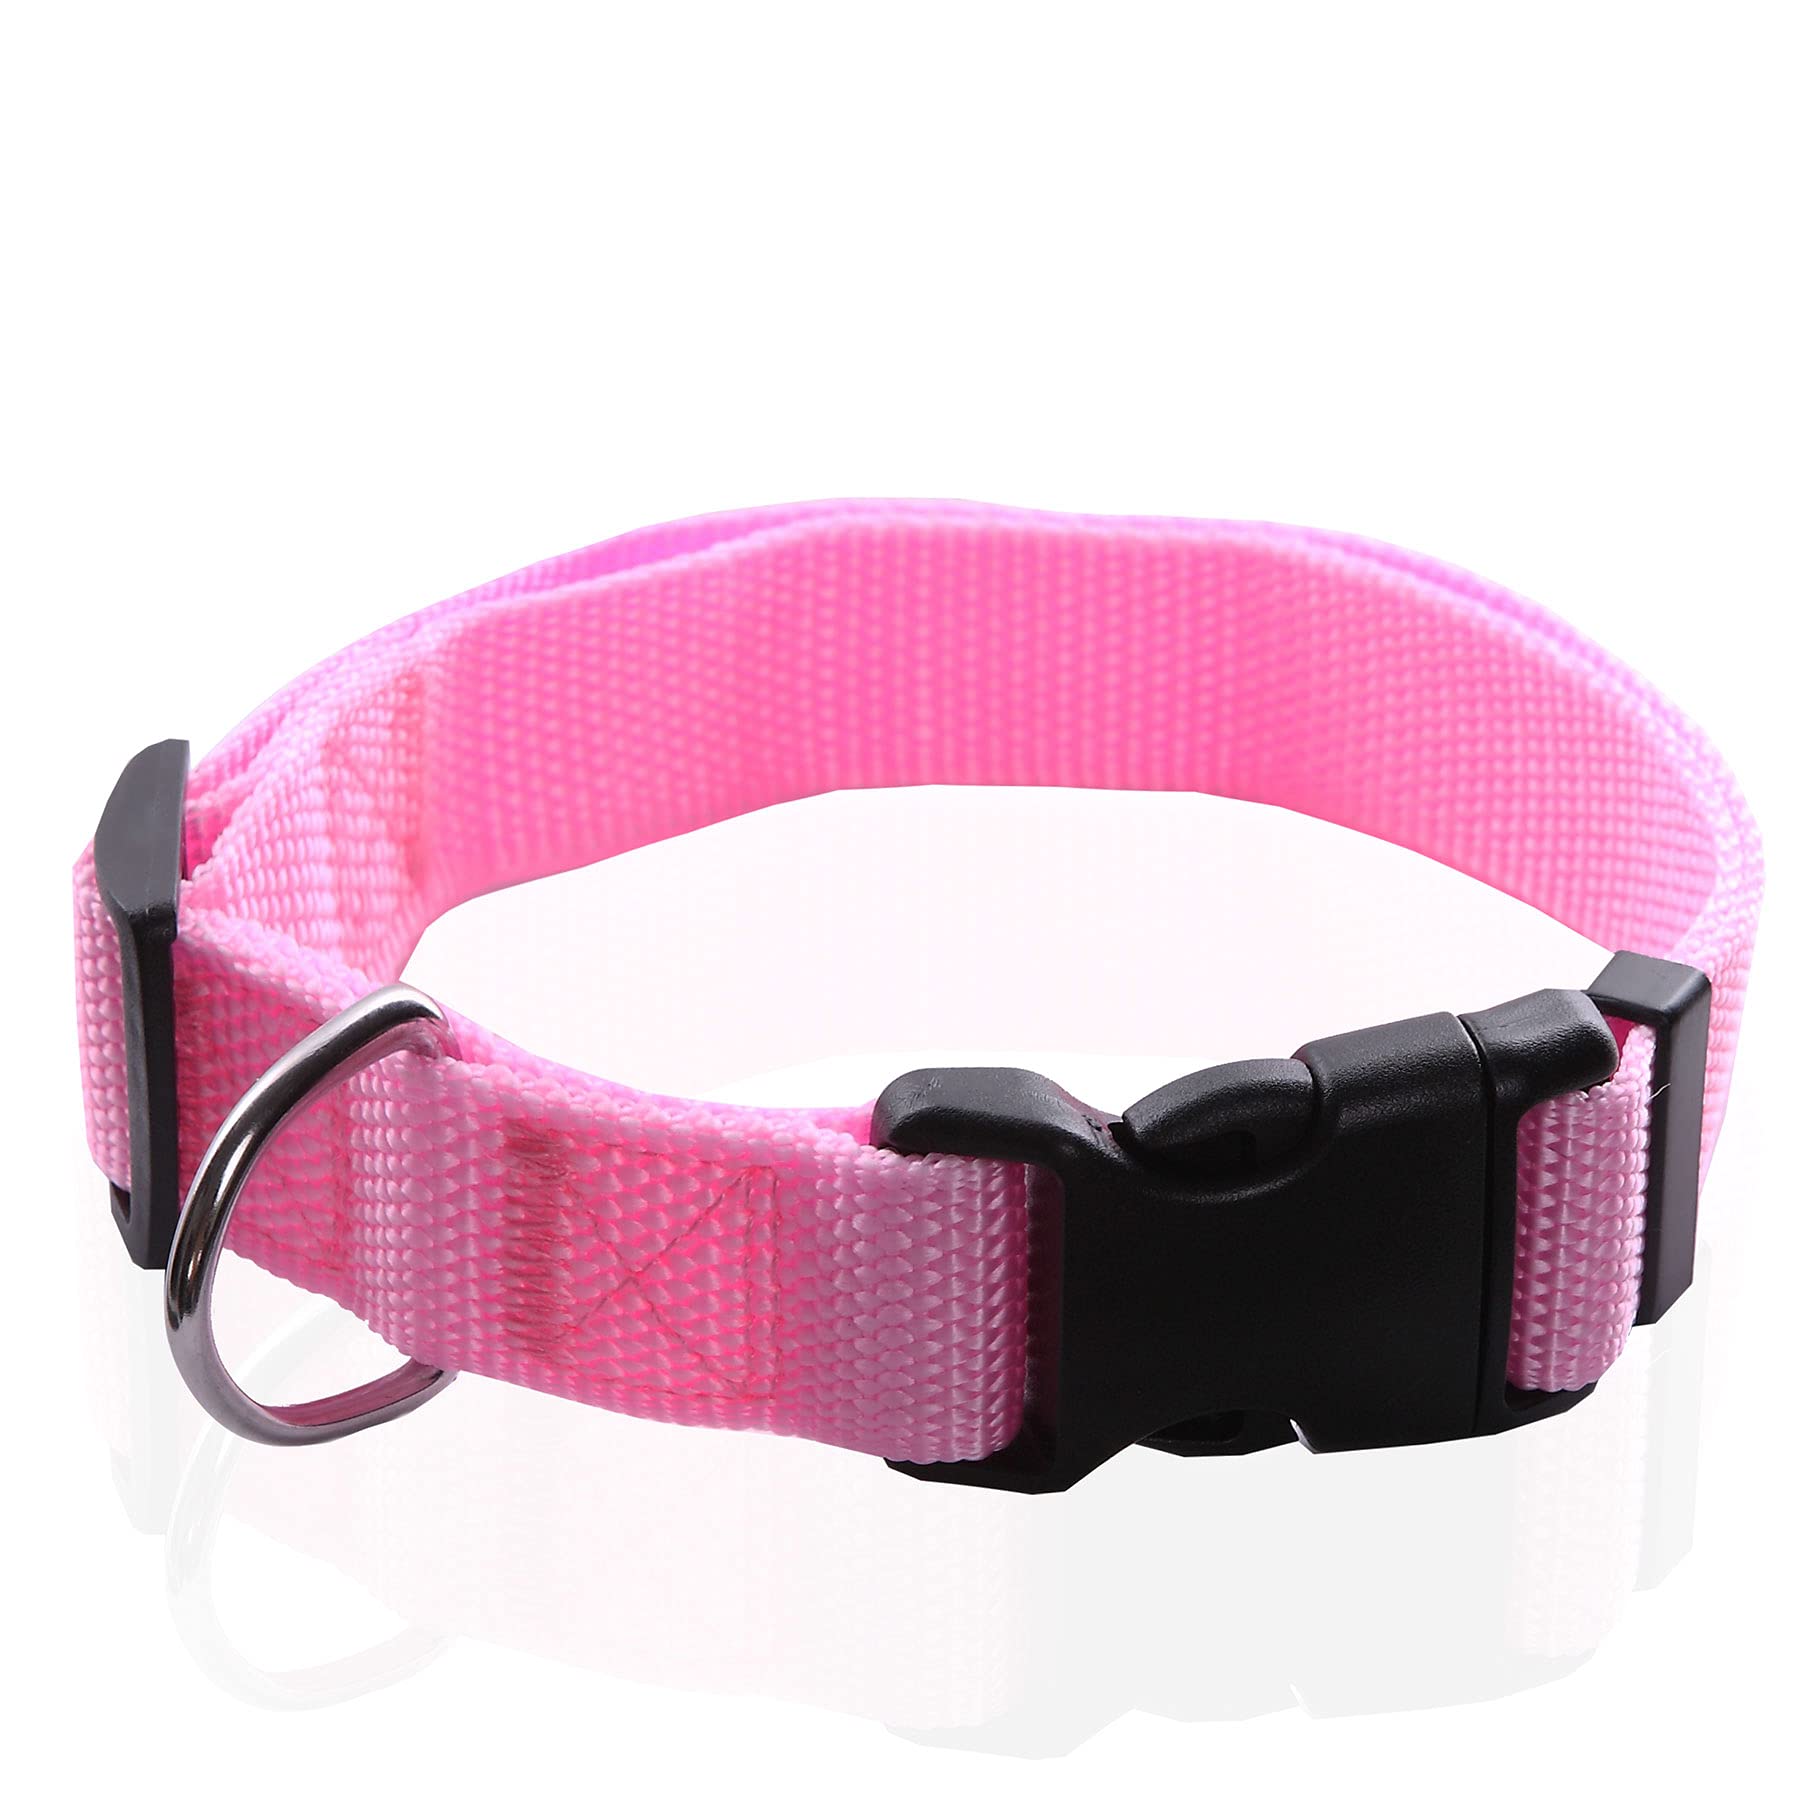 taida Adjustable Nylon Dog Collar, Durable Pet Collar 1 Inch 34 Inch 58 Inch Wide, For Large Medium Small Dogs (S( 58 X 11-16), Pink)